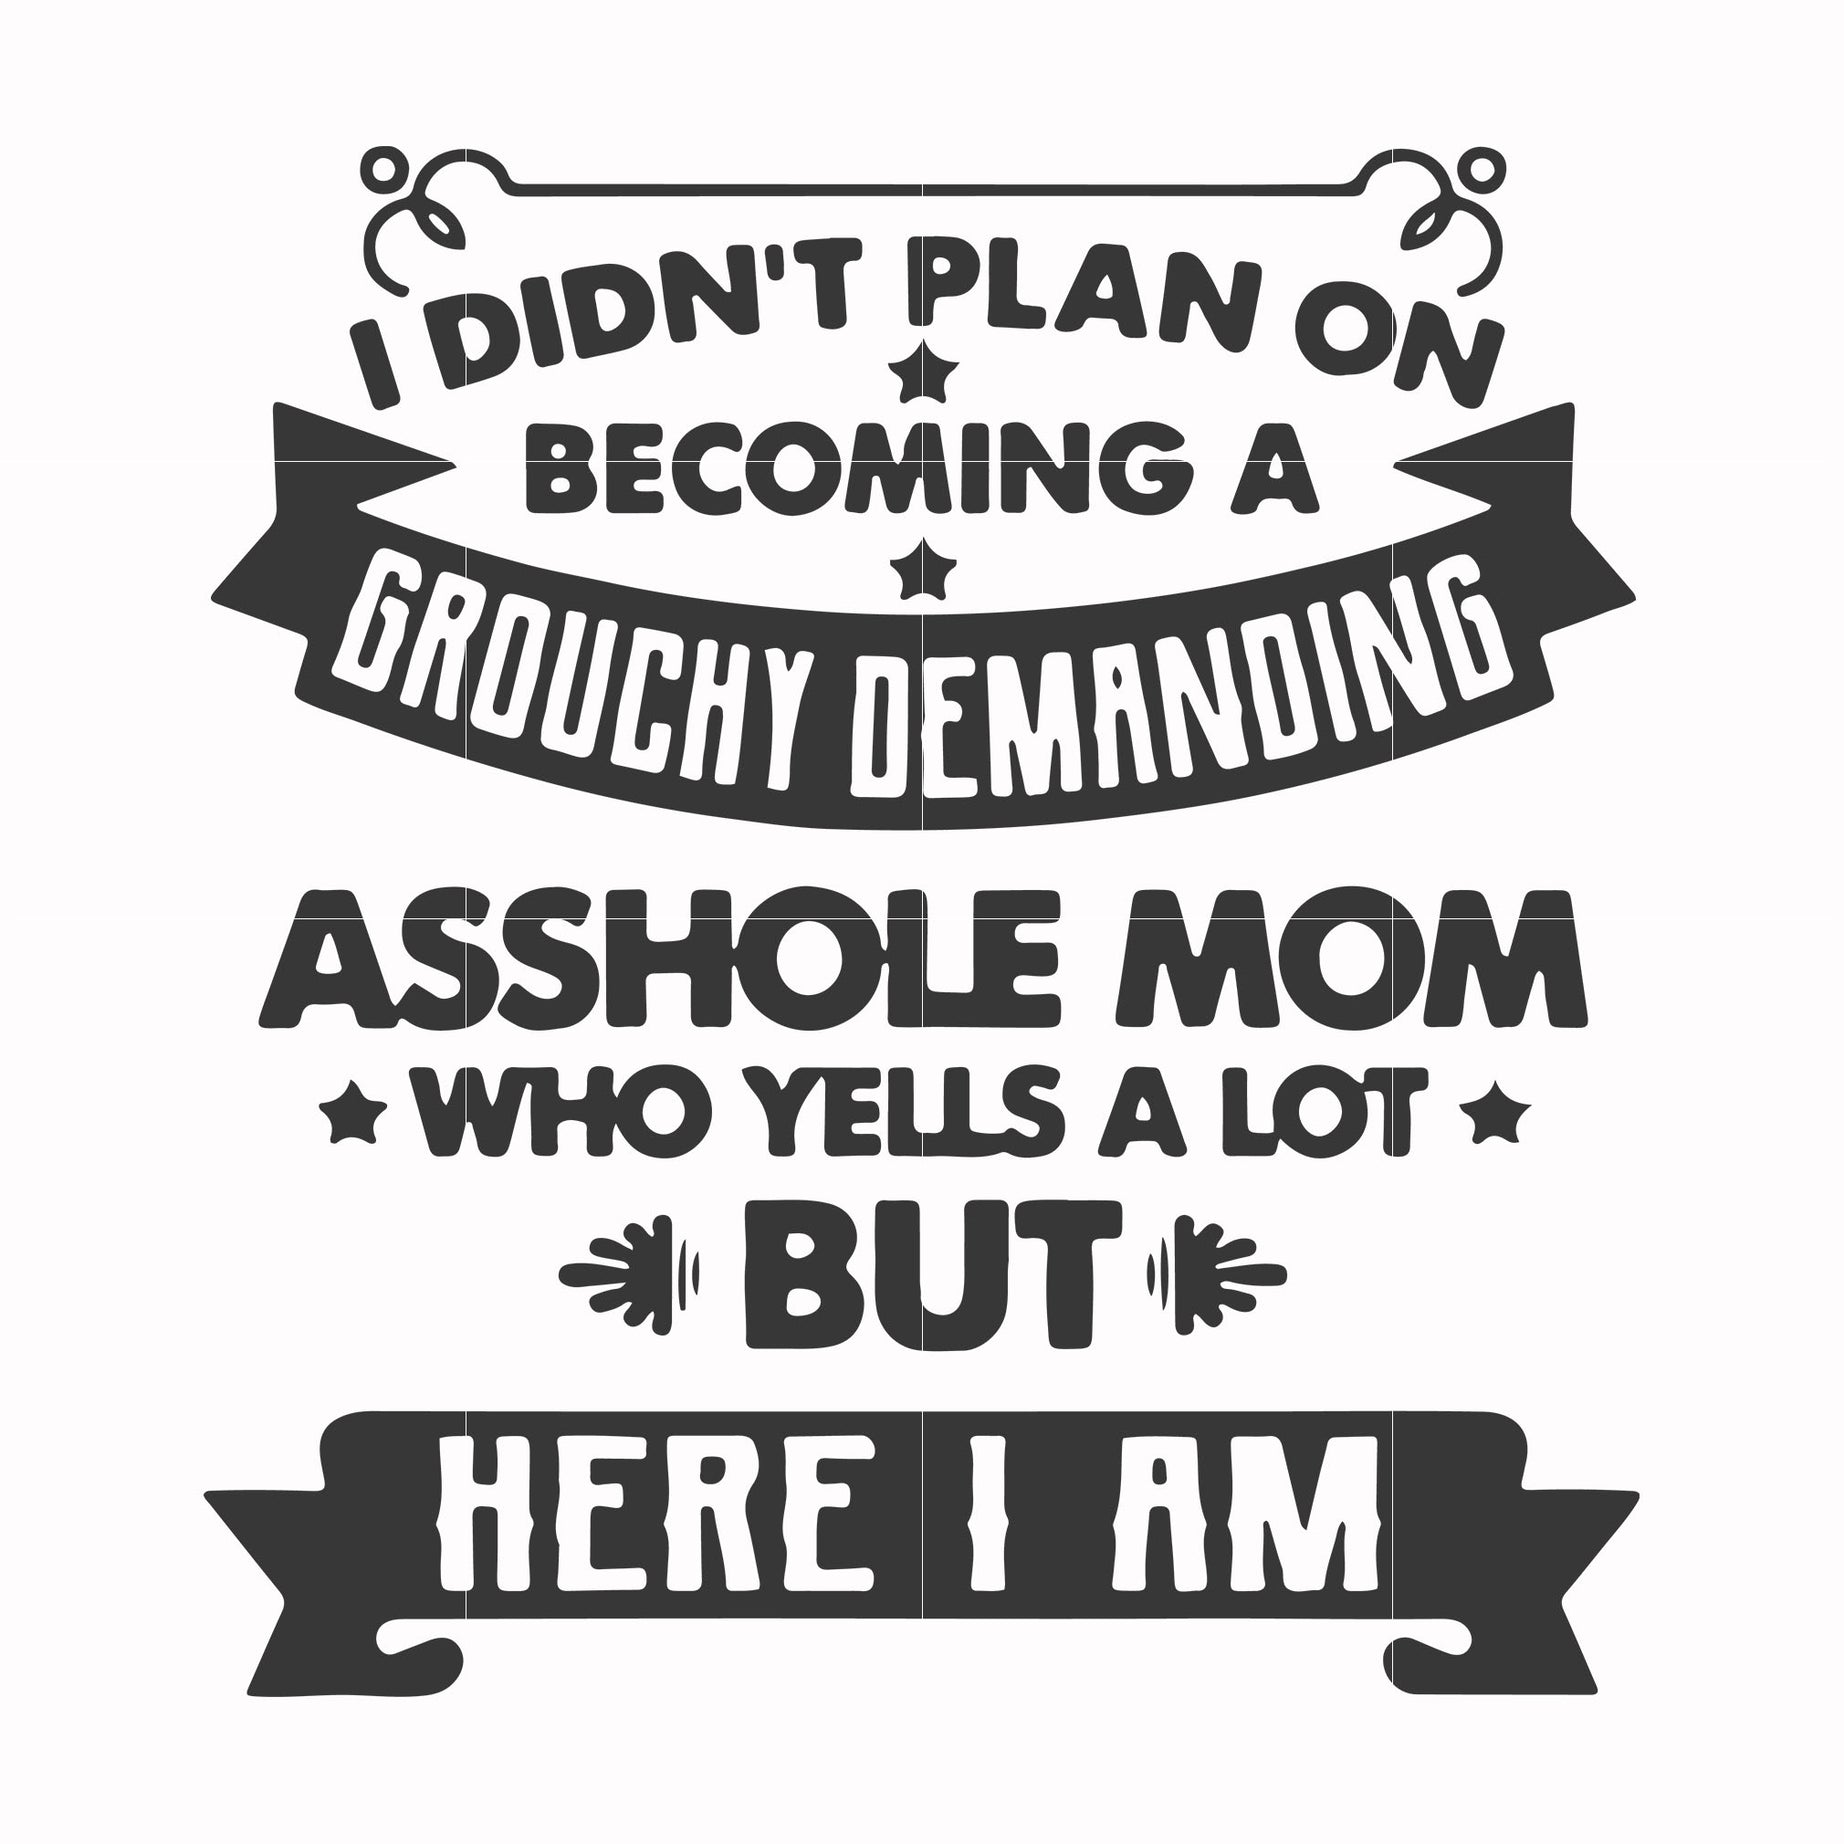 I didn't plan on becoming a grouchy demanding asshole mom who yells a lot but here I am svg, png, dxf, eps file FN000819